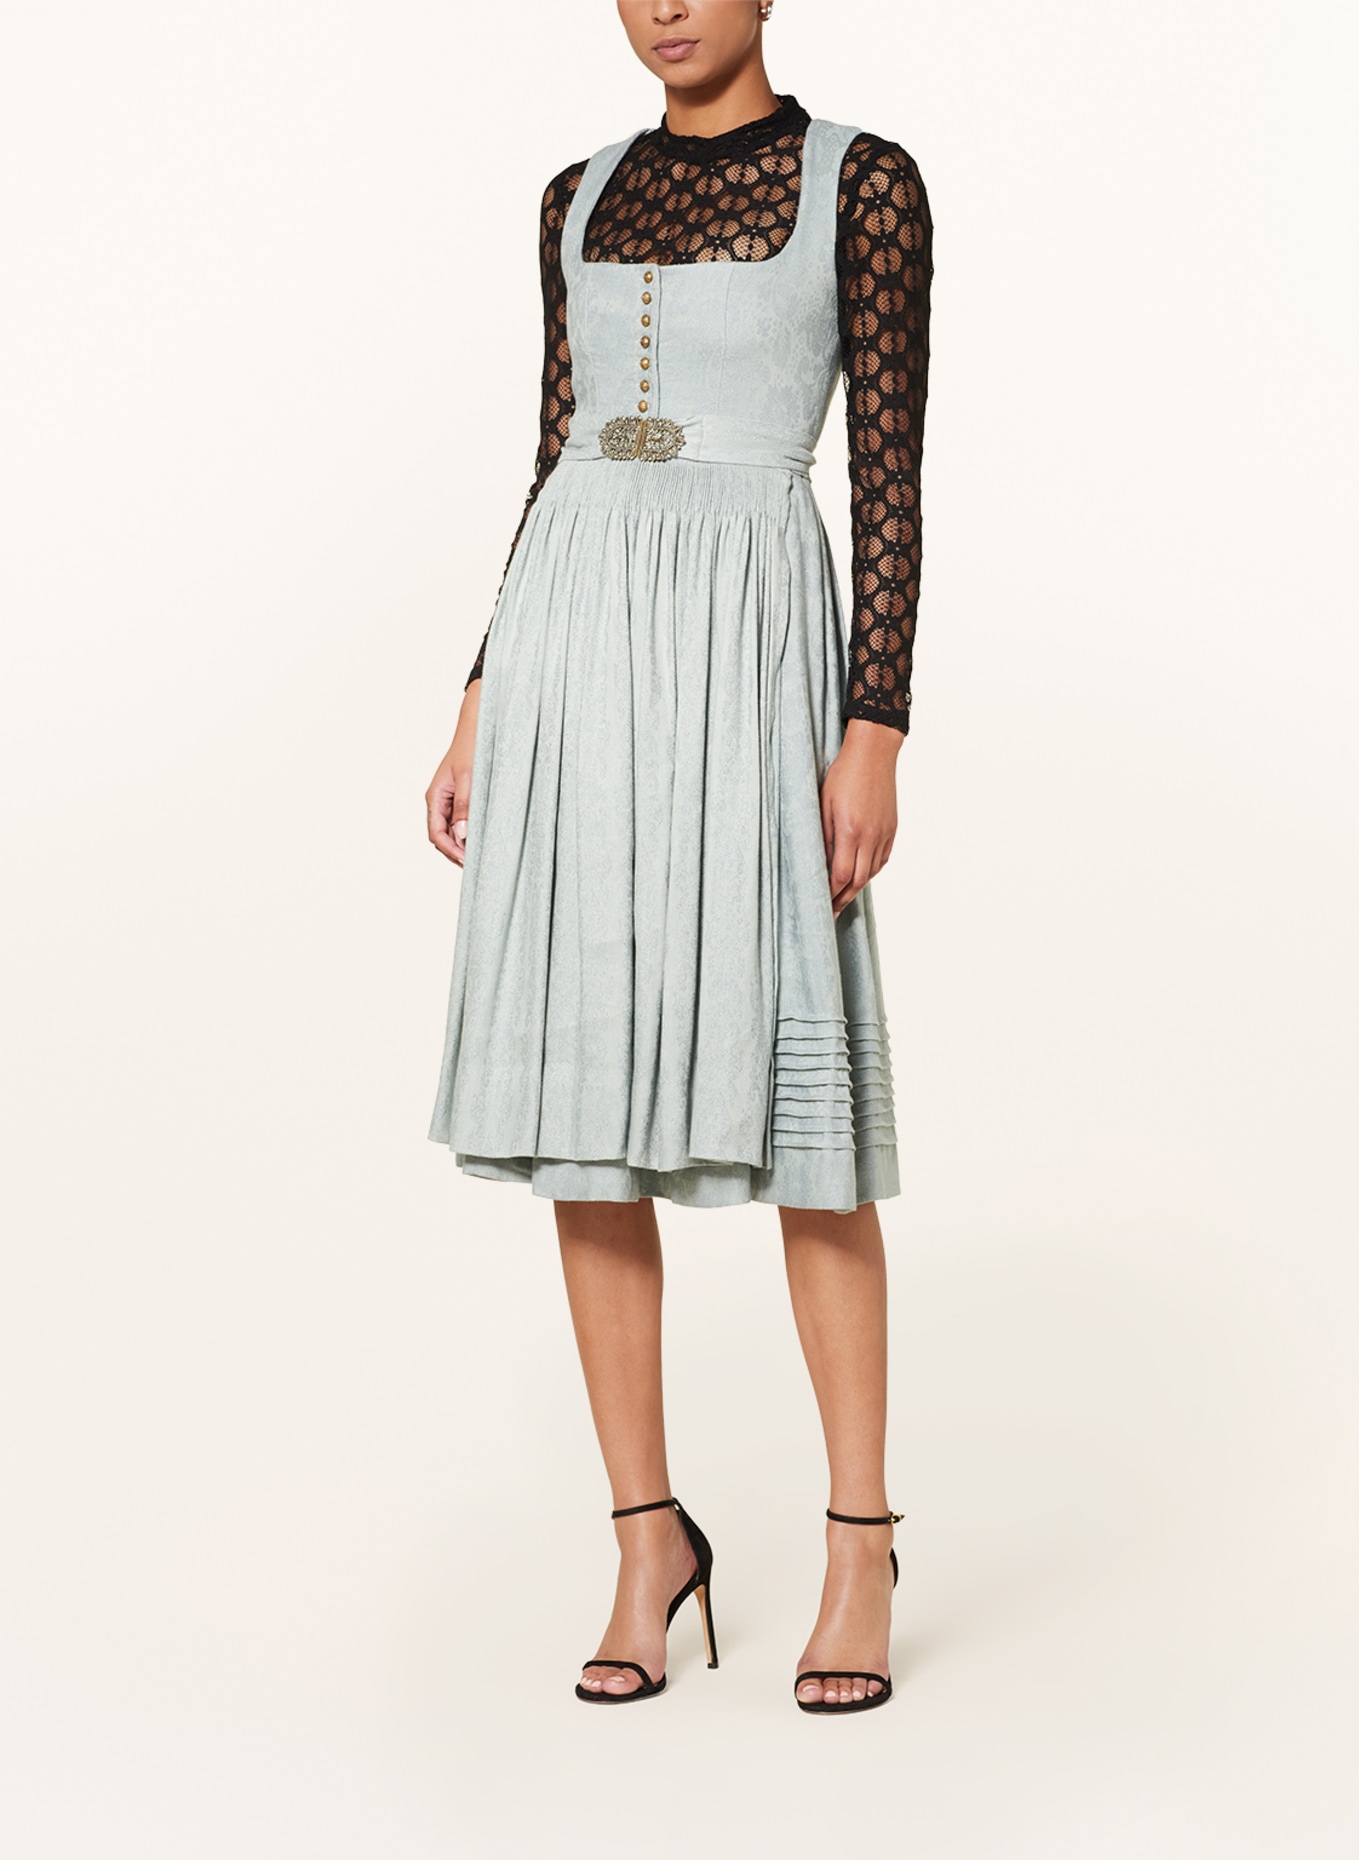 BERWIN & WOLFF Dirndl blouse made of lace, Color: BLACK (Image 4)